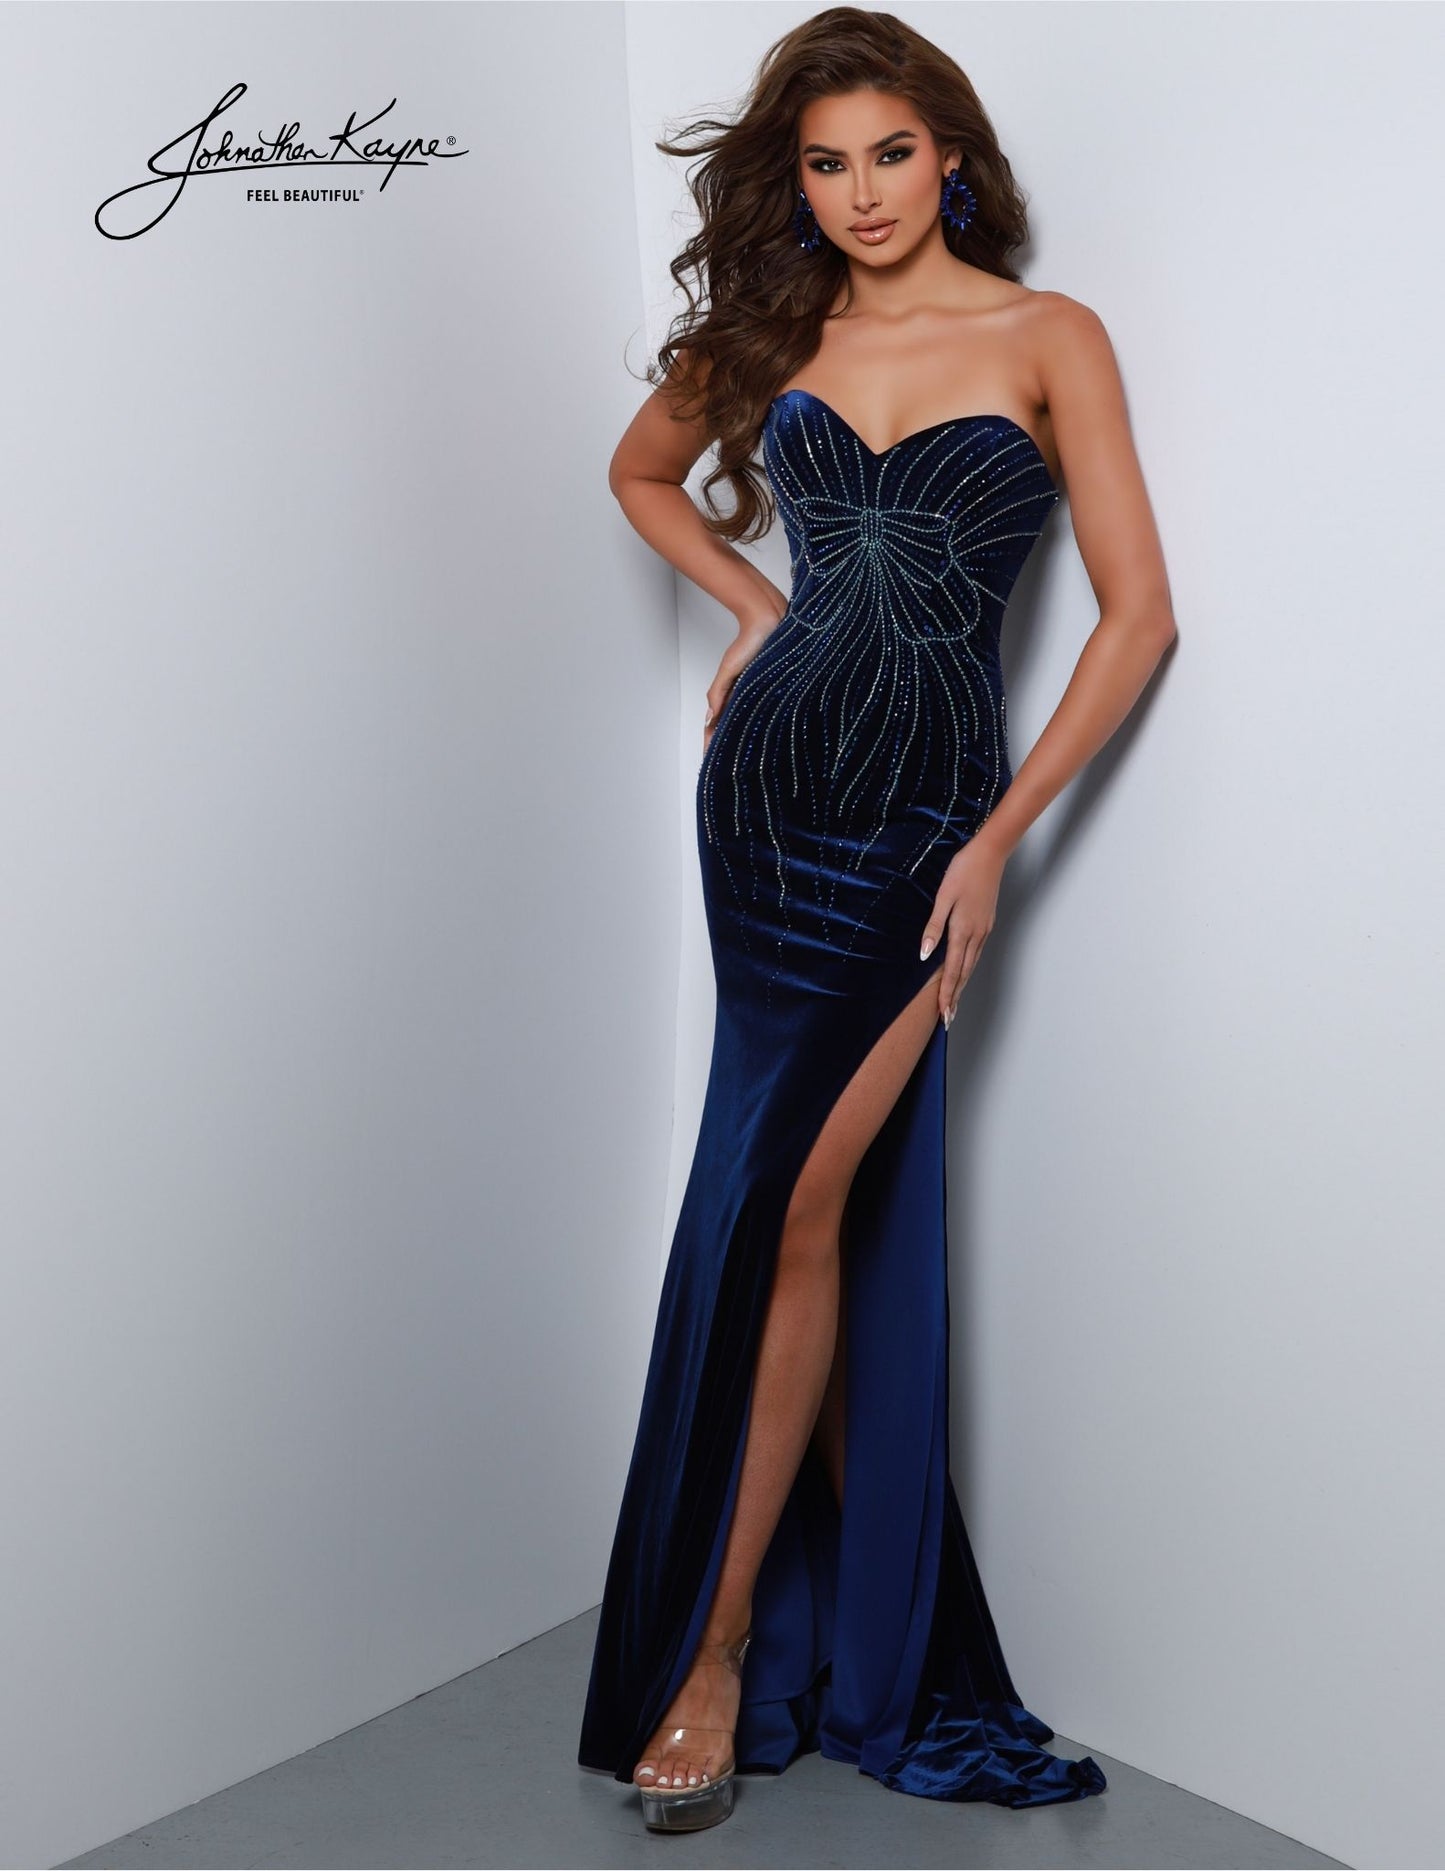 Johnathan Kayne 2822 offers a timeless look, crafted with stretch velvet and a luxurious strapless sweetheart neckline. This elegant understated gown features a high slit to create an alluring silhouette suitable for any formal event. Its classic styling and superior craftsmanship will ensure you look and feel amazing. It's a bow-tiful masterpiece! 